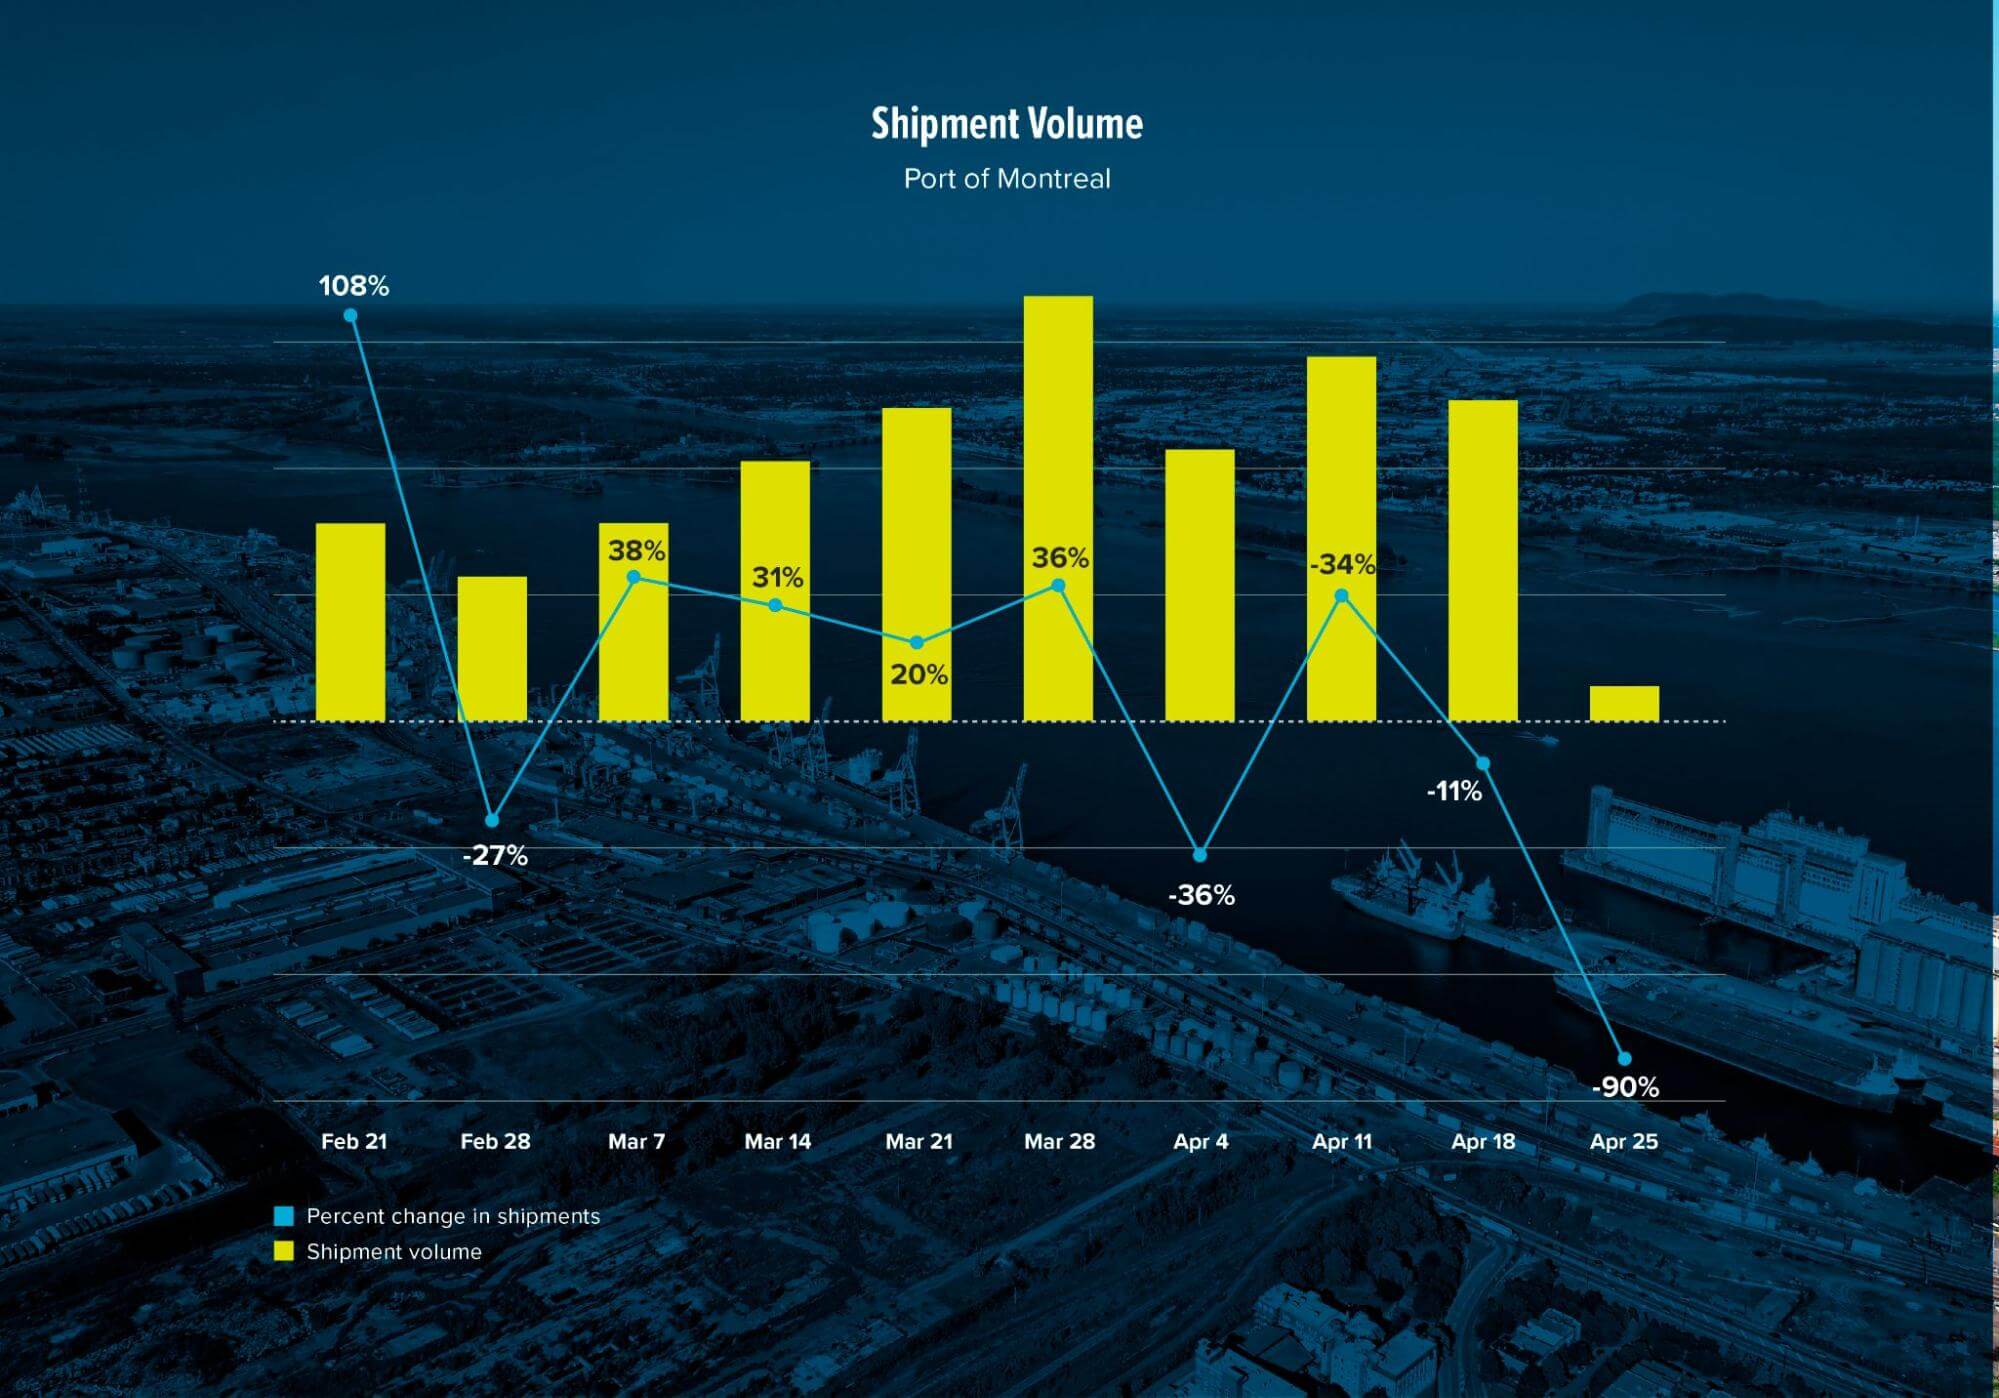 shipment volume at the port of Montreal following the April 2021 strike